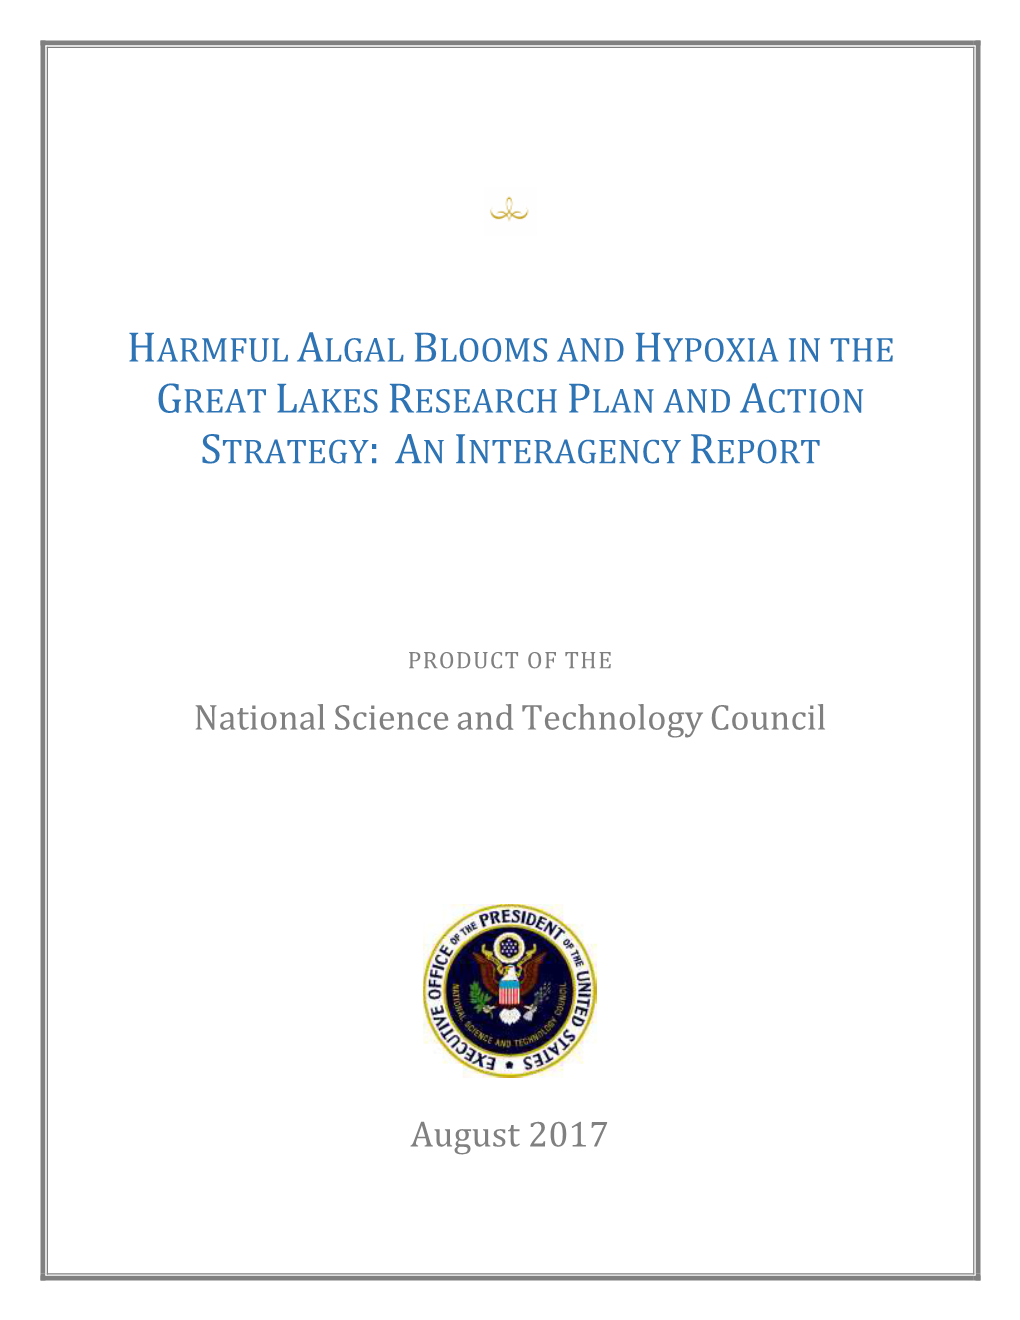 Harmful Algal Blooms and Hypoxia in the Great Lakes Research Plan and Action Strategy: an Interagency Report